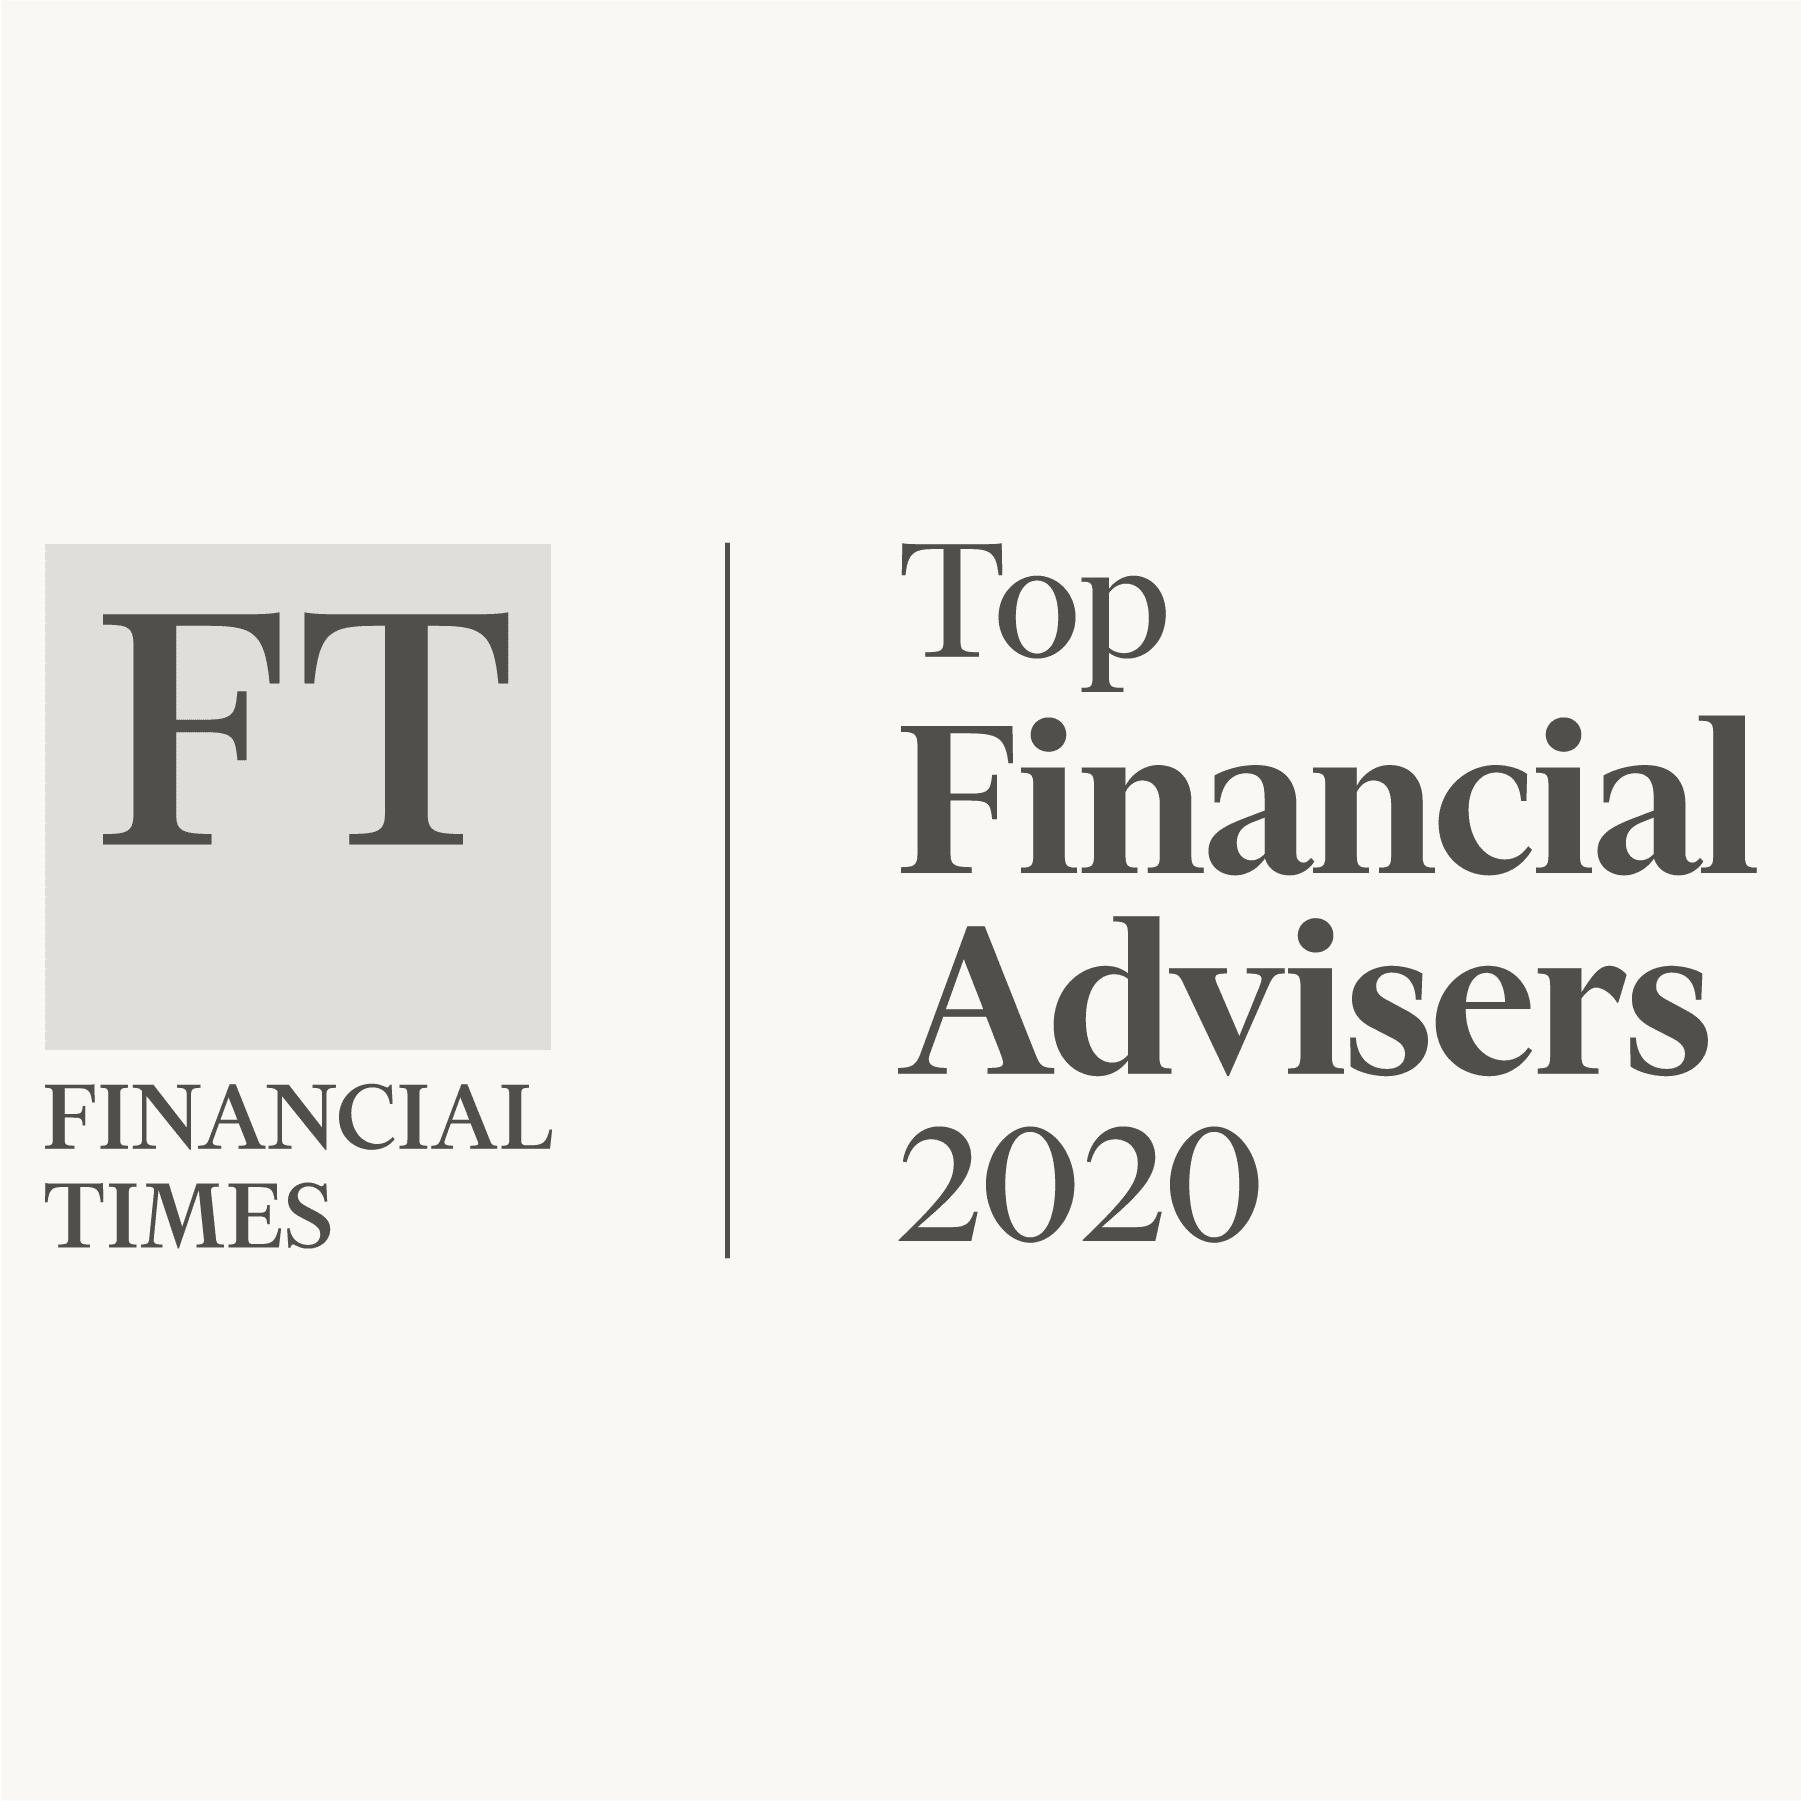 Financial Times Top Financial Advisers - 2020